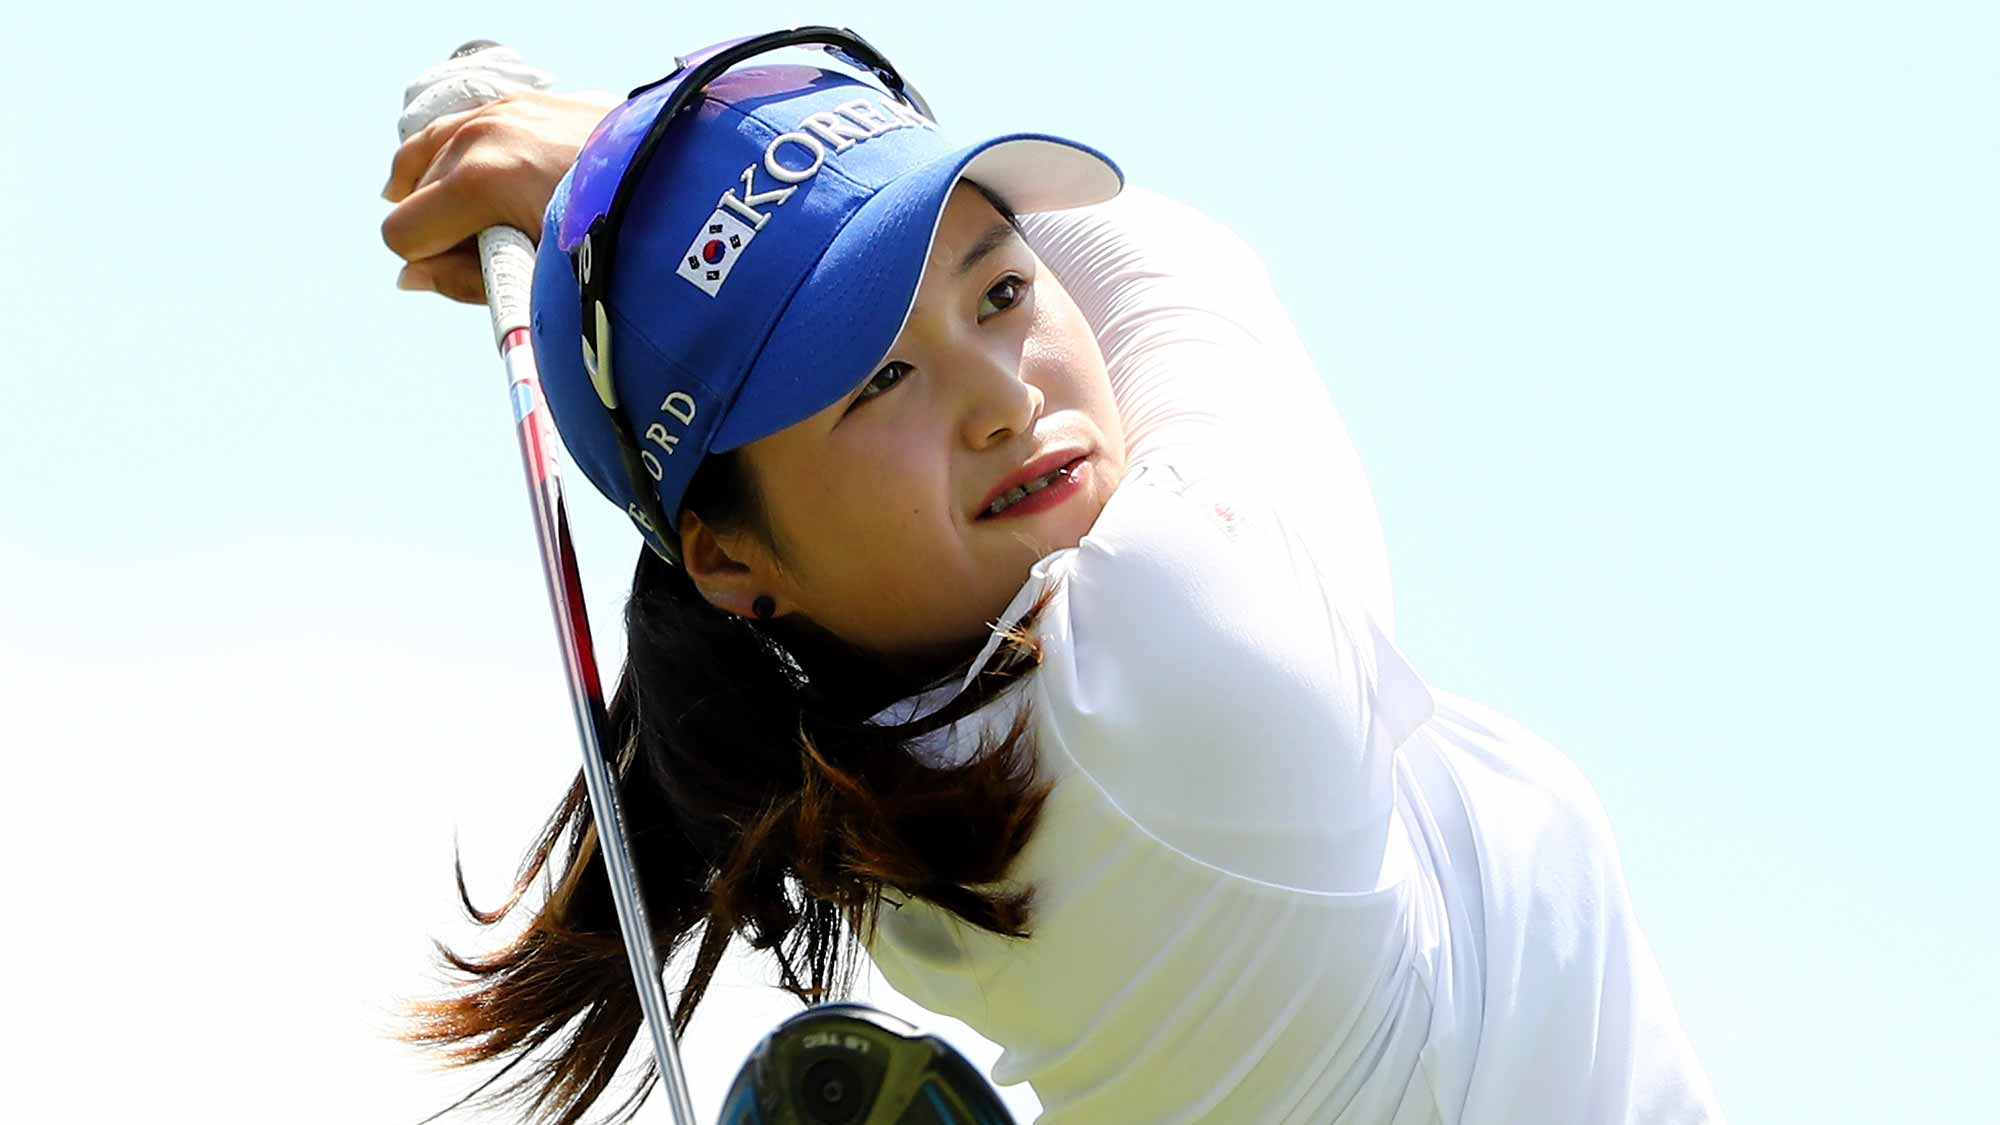 Hye-Jin Choi of Korea takes her shot from the seocnd tee during the final round of the U.S. Women's Open on July 16, 2017 at Trump National Golf Club